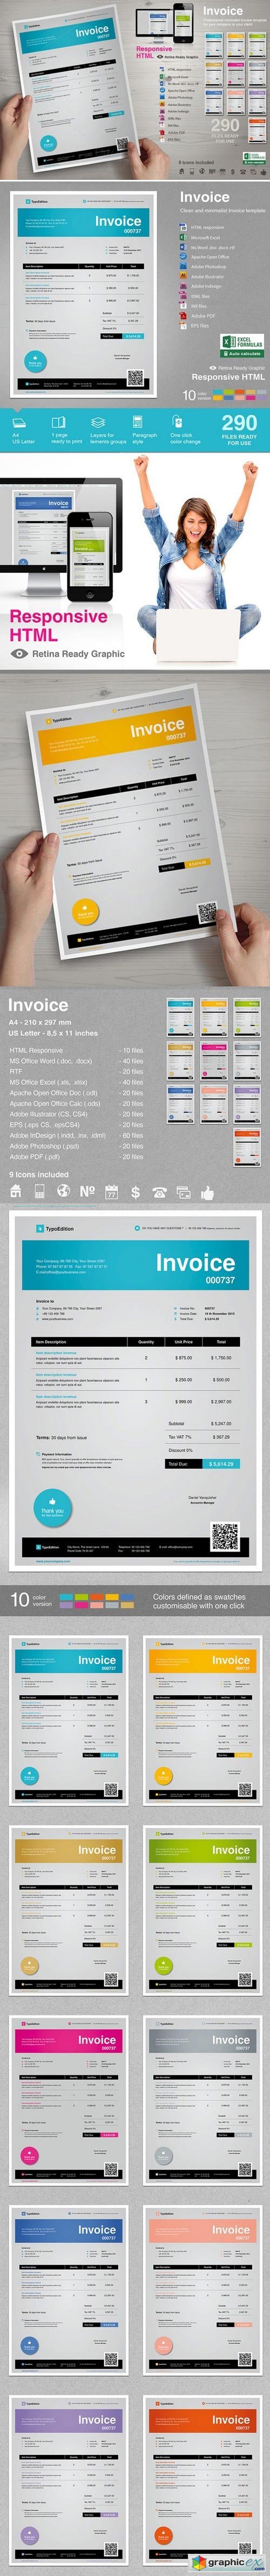 Invoice Stationery Template